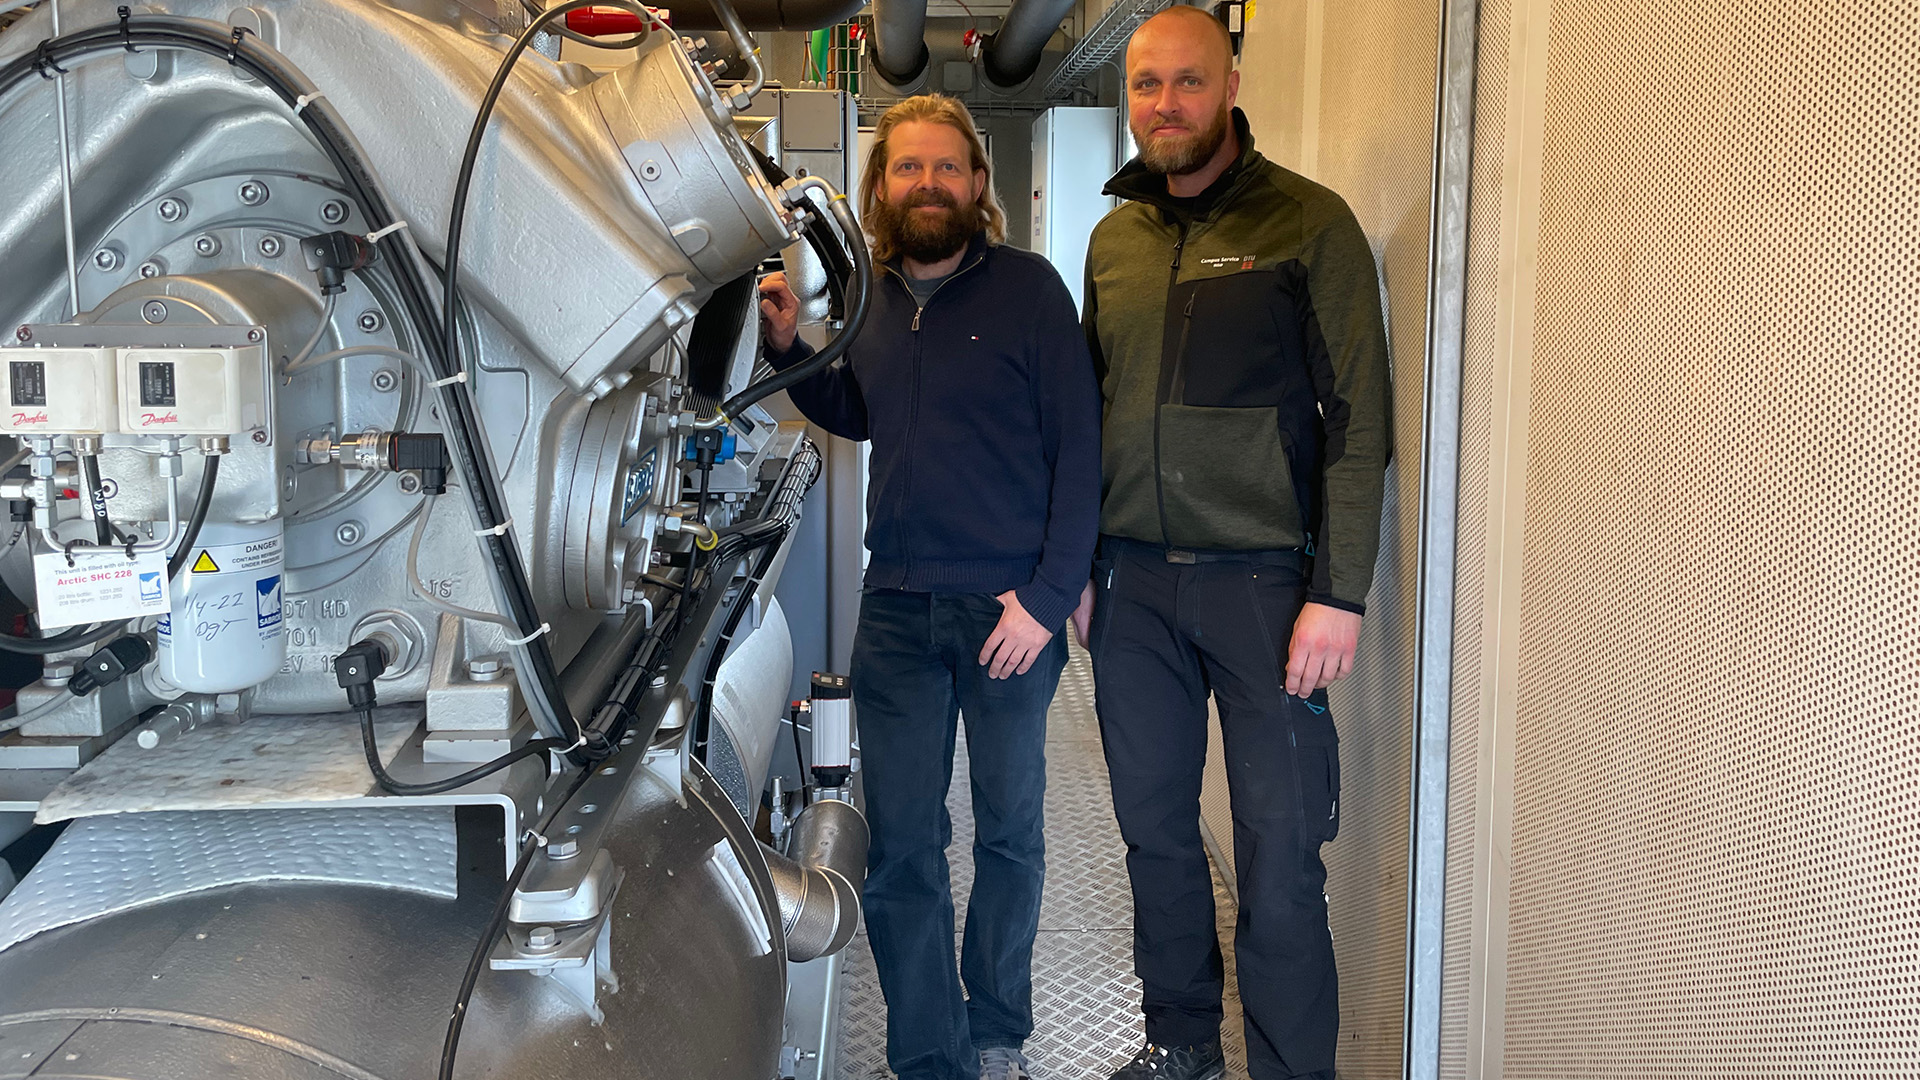 With a heat pump connected to DTU's data center, Esben Højrup and Bjarke Nonbøl from DTU Campus Service utilize waste heat from cooling servers. The heat pump supplies heat to the district heating network on Risø Campus.